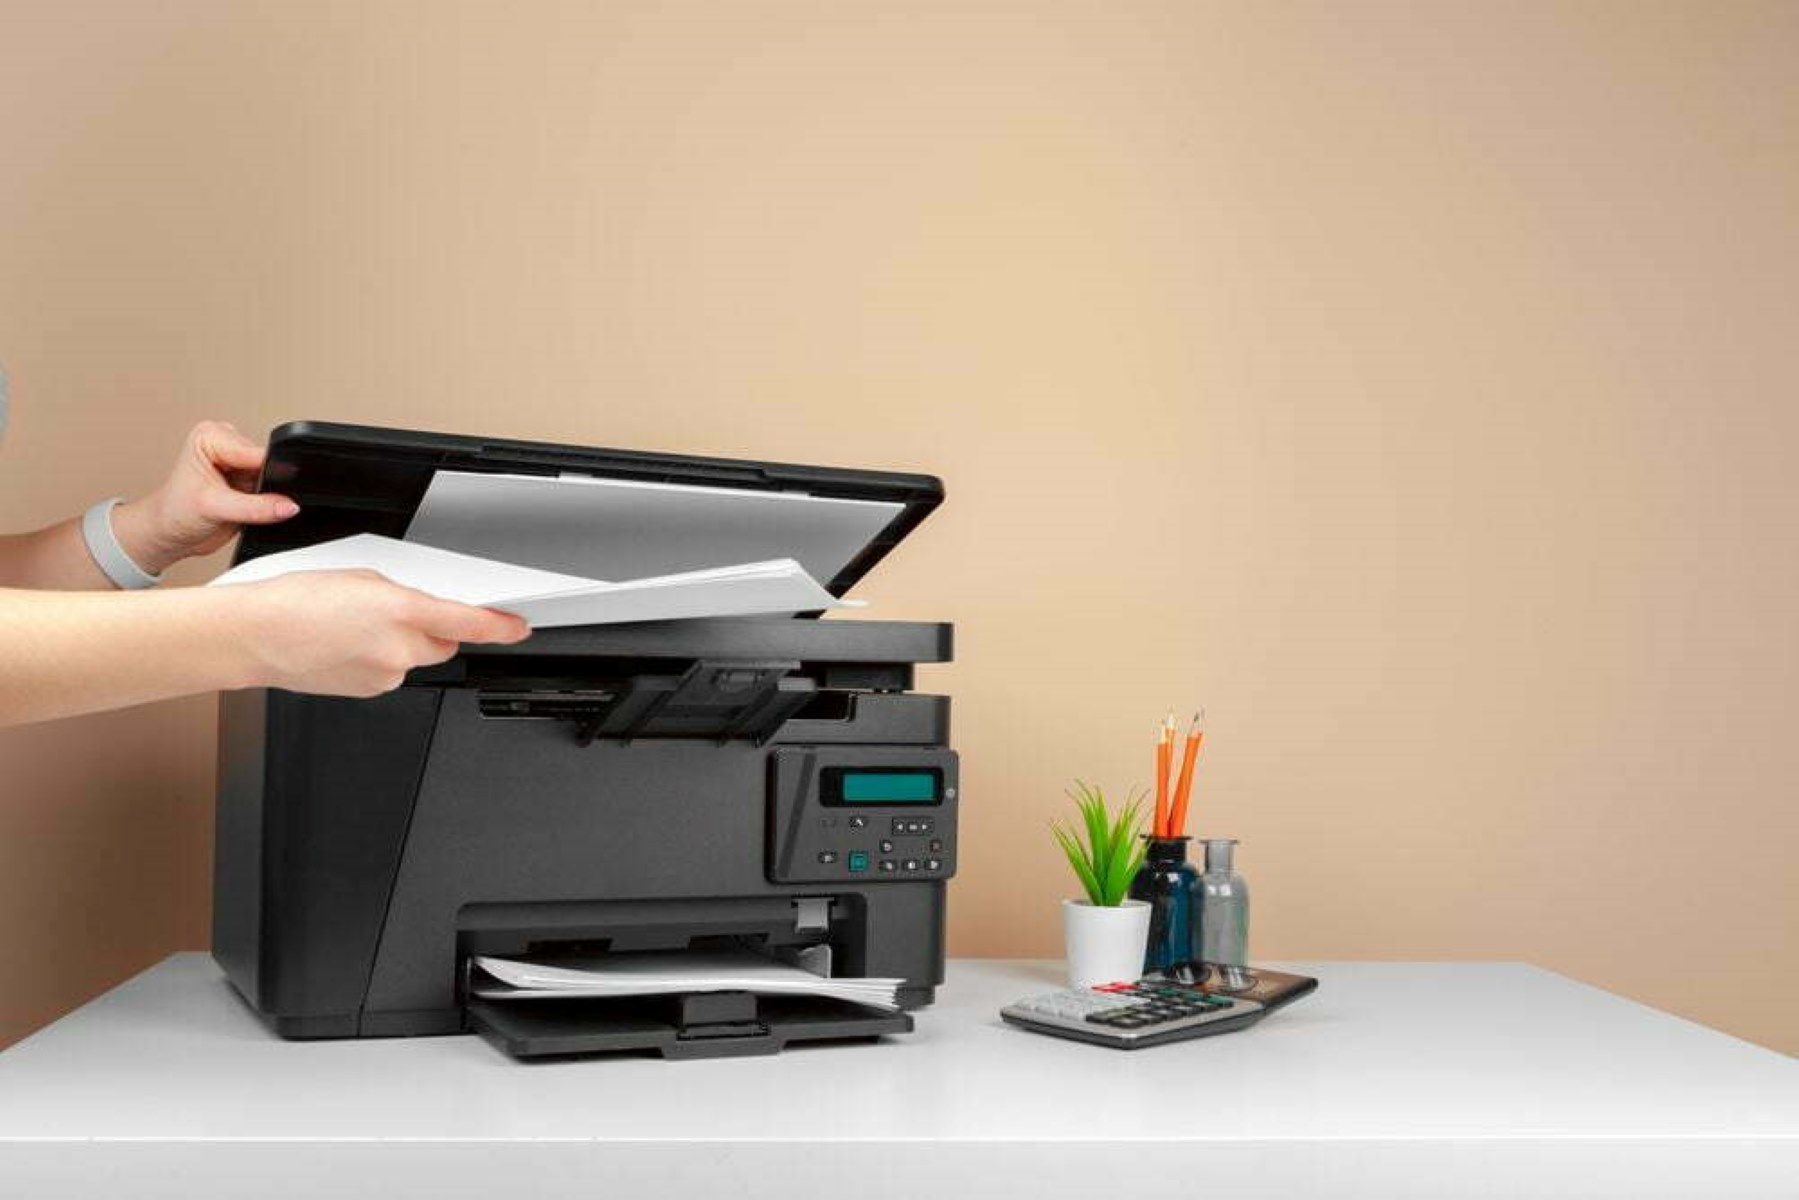 How To Print On Cardstock On A Canon Printer